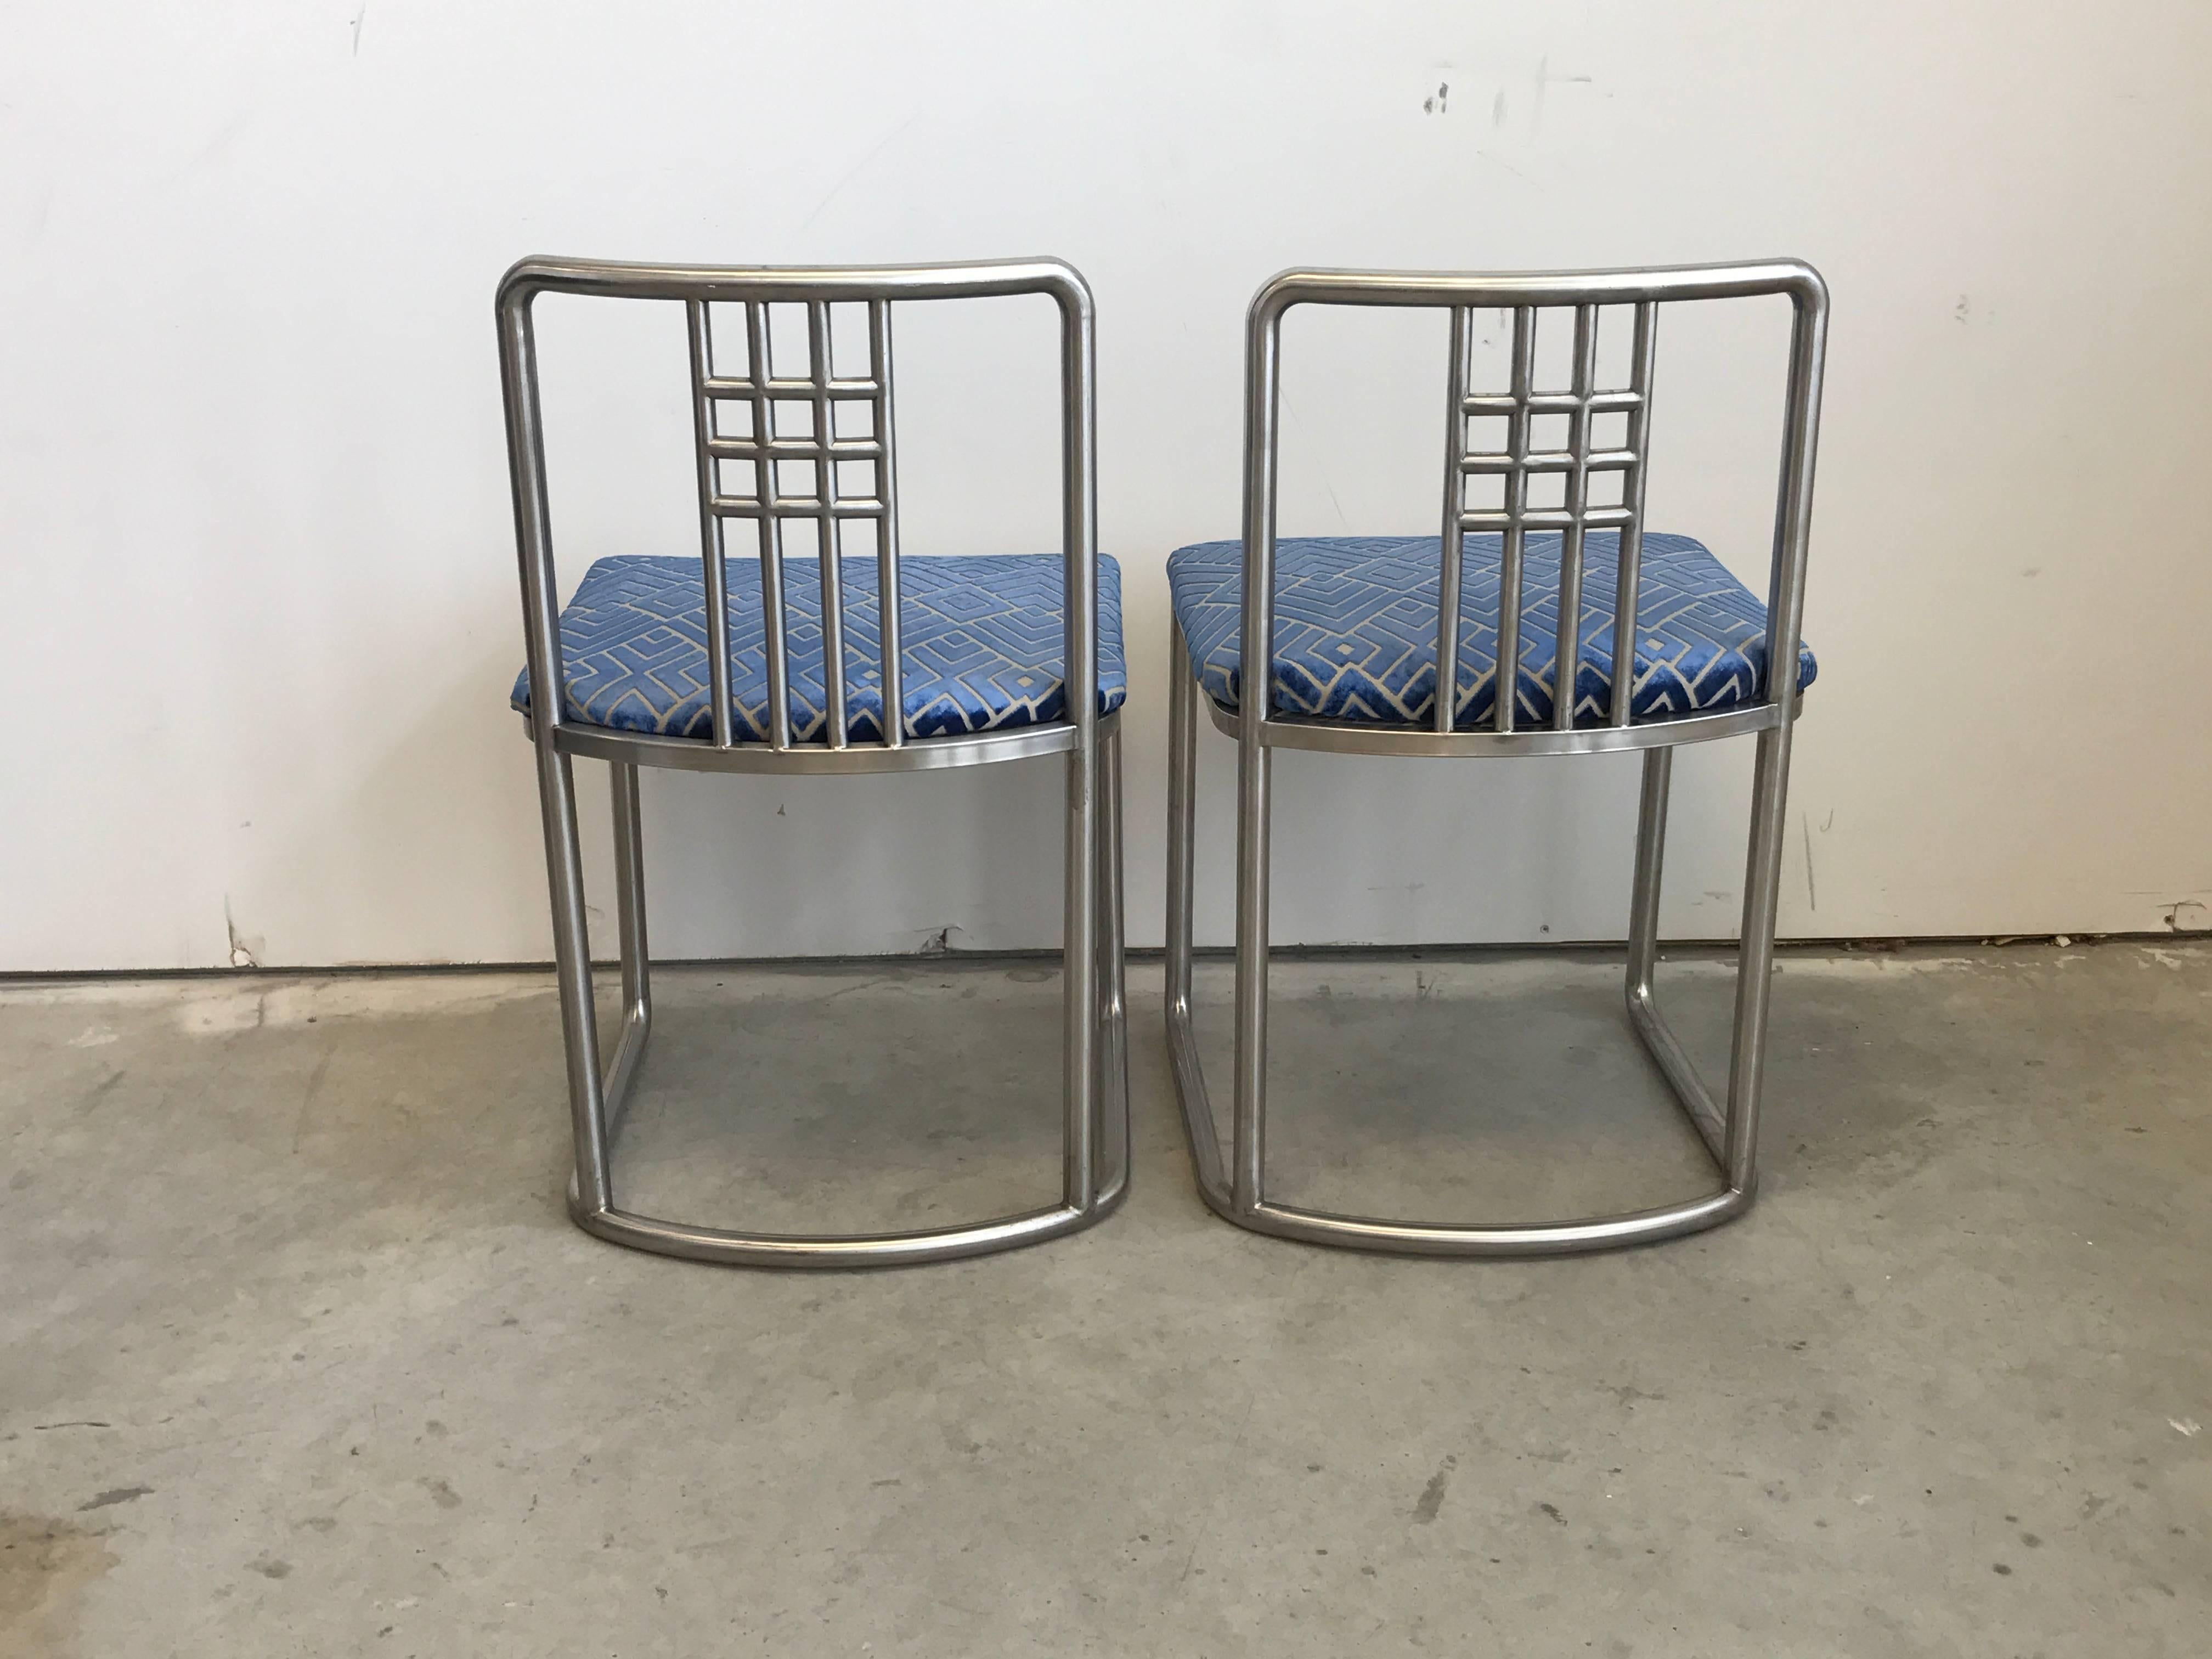 Brushed 1970s Frank Lloyd Wright Style Stainless Steel Chairs with Blue Velvet, Pair